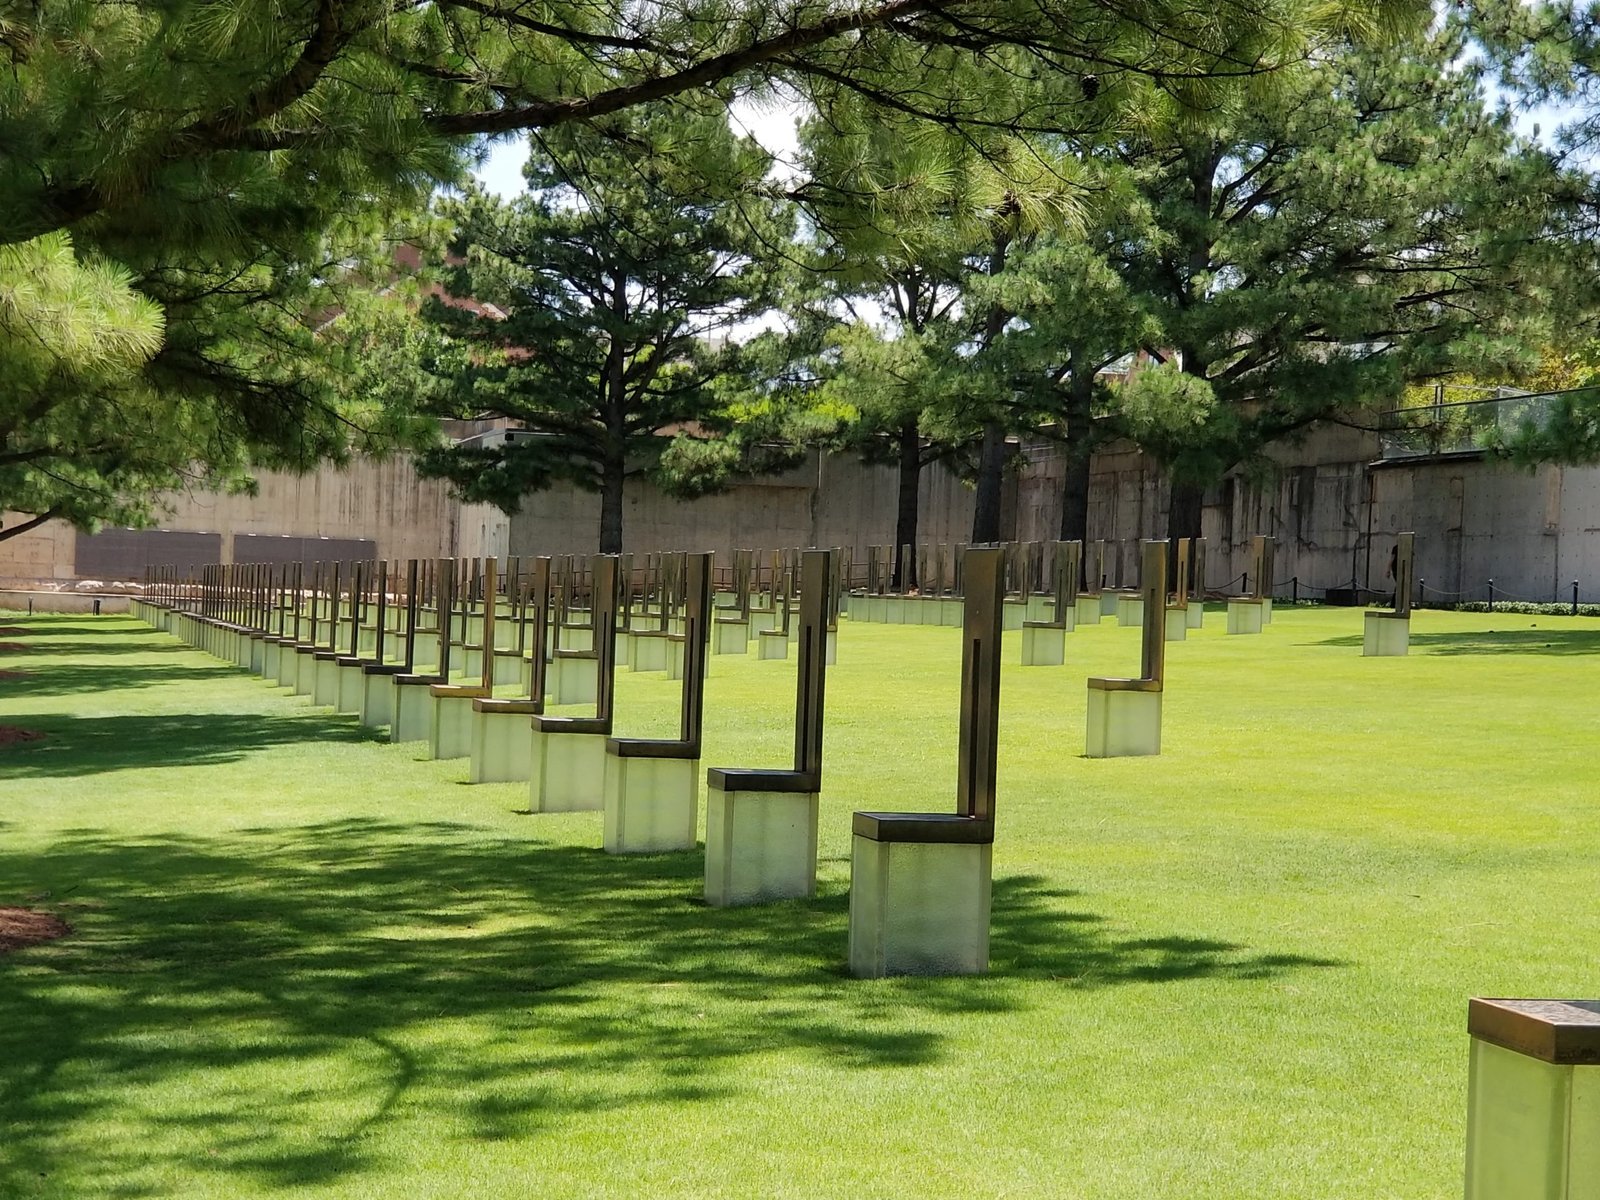 The 168 Chairs represent those killed on April 19, 1995. They stand in nine rows, each representing a floor of the Federal Building where the field is now located. Each chair bears the name of someone killed on that floor. Nineteen smaller chairs stand for the children.
..........................................